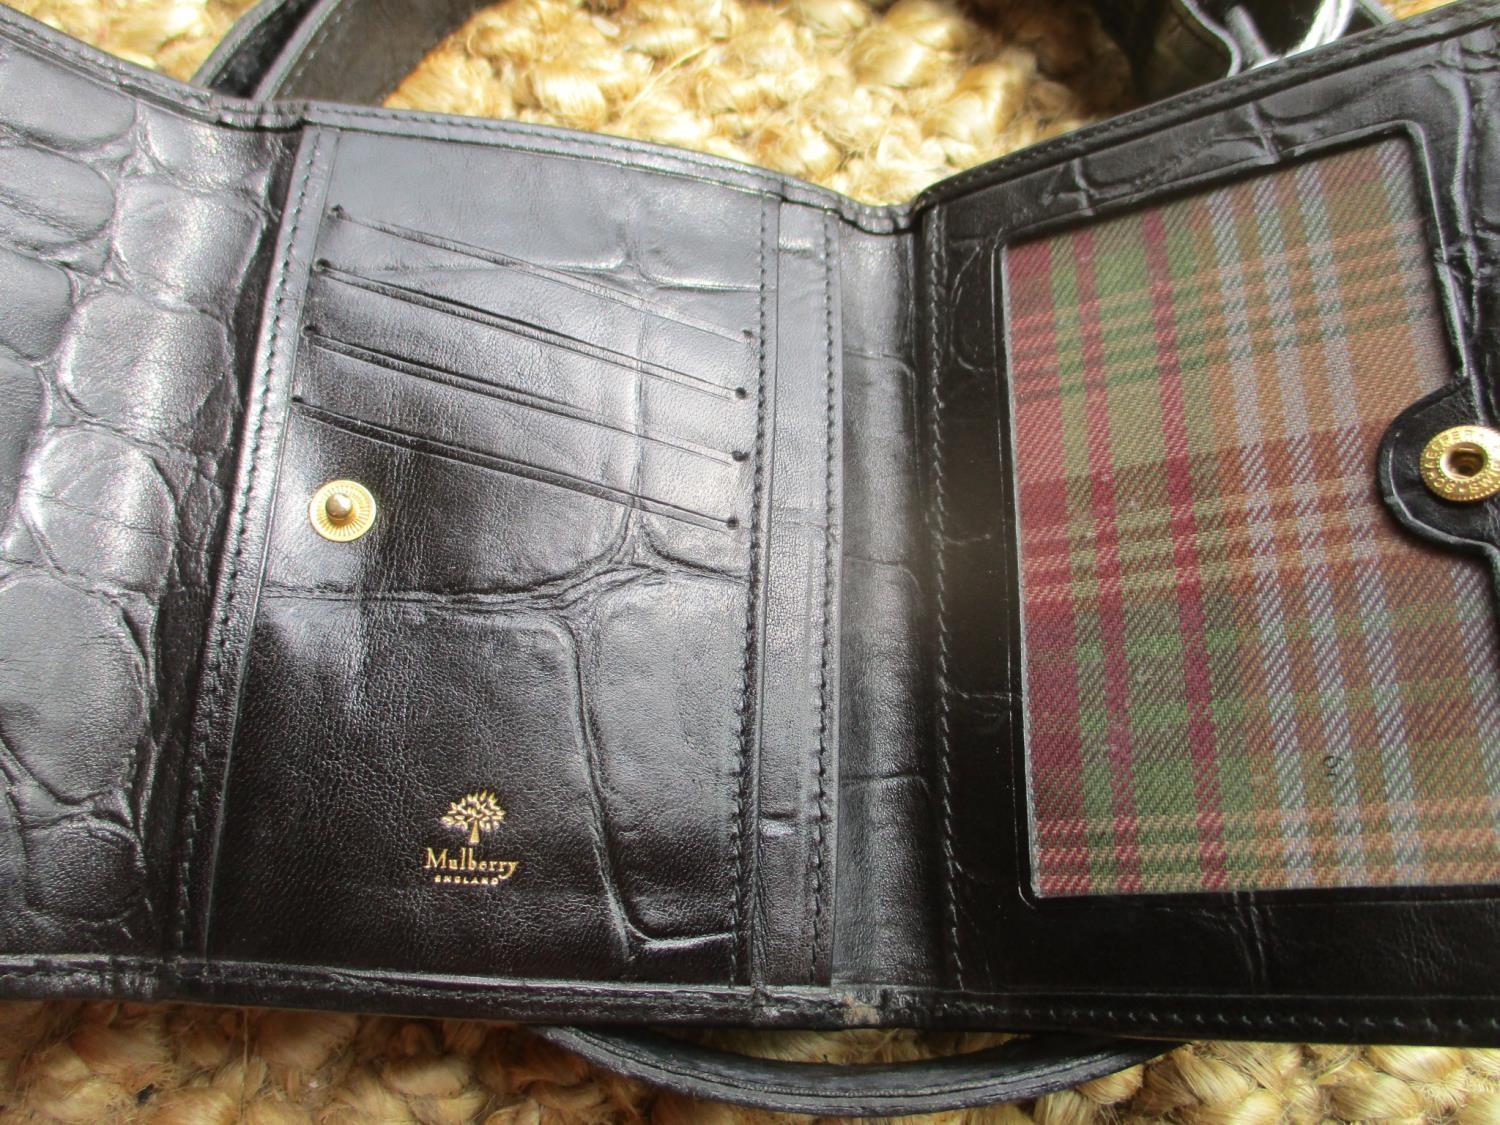 A Mulberry black leather wallet and a matching Mulberry belt, both in a crocodile textured - Image 8 of 8